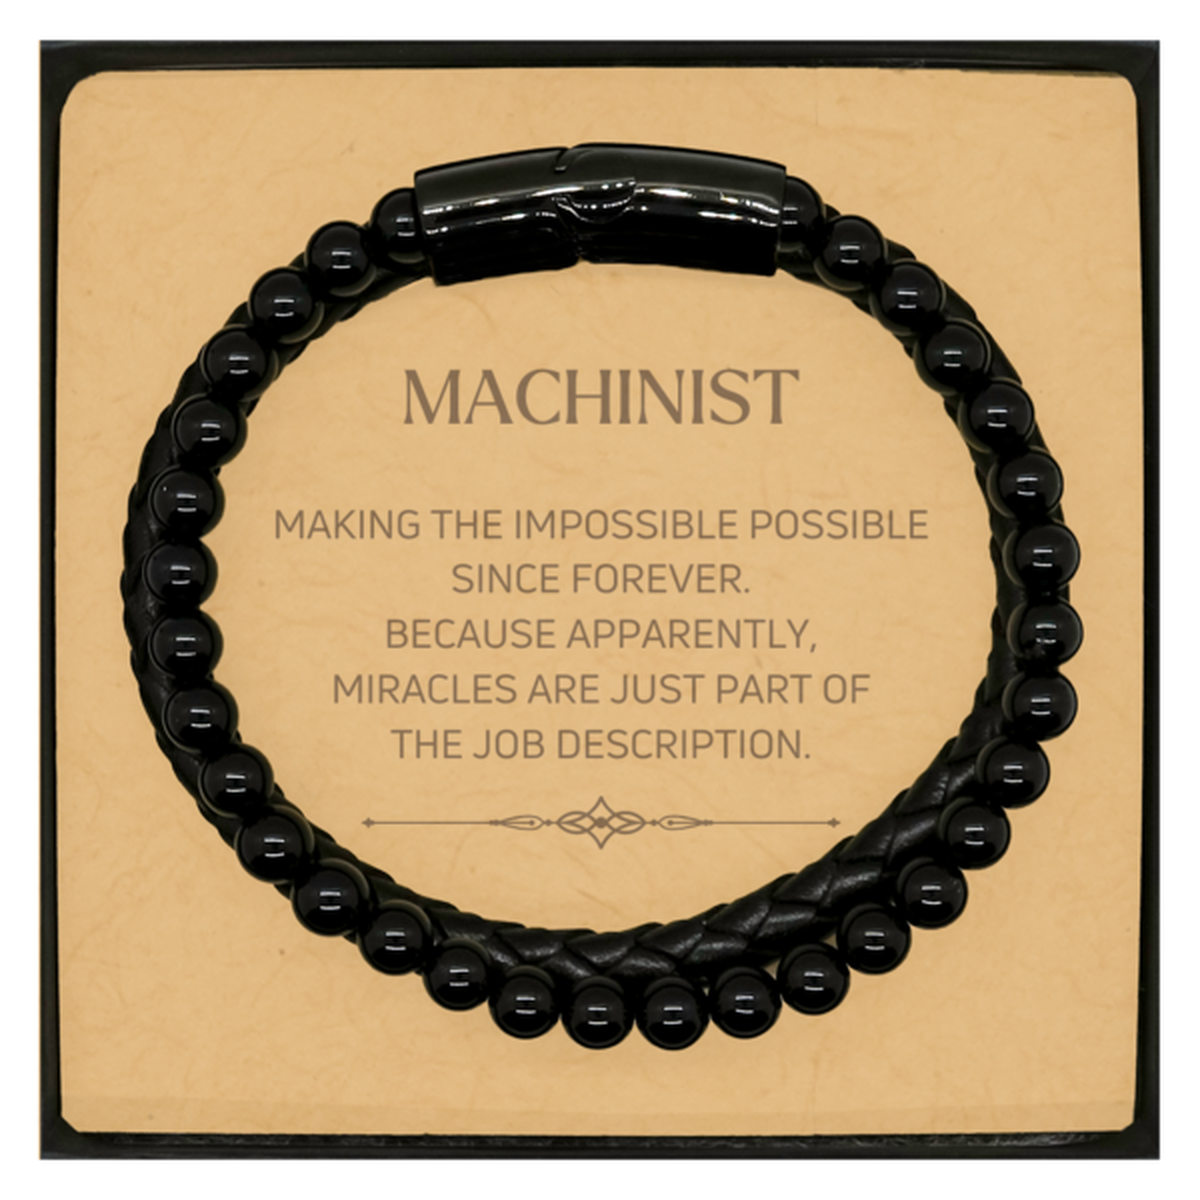 Funny Machinist Gifts, Miracles are just part of the job description, Inspirational Birthday Christmas Stone Leather Bracelets For Machinist, Men, Women, Coworkers, Friends, Boss